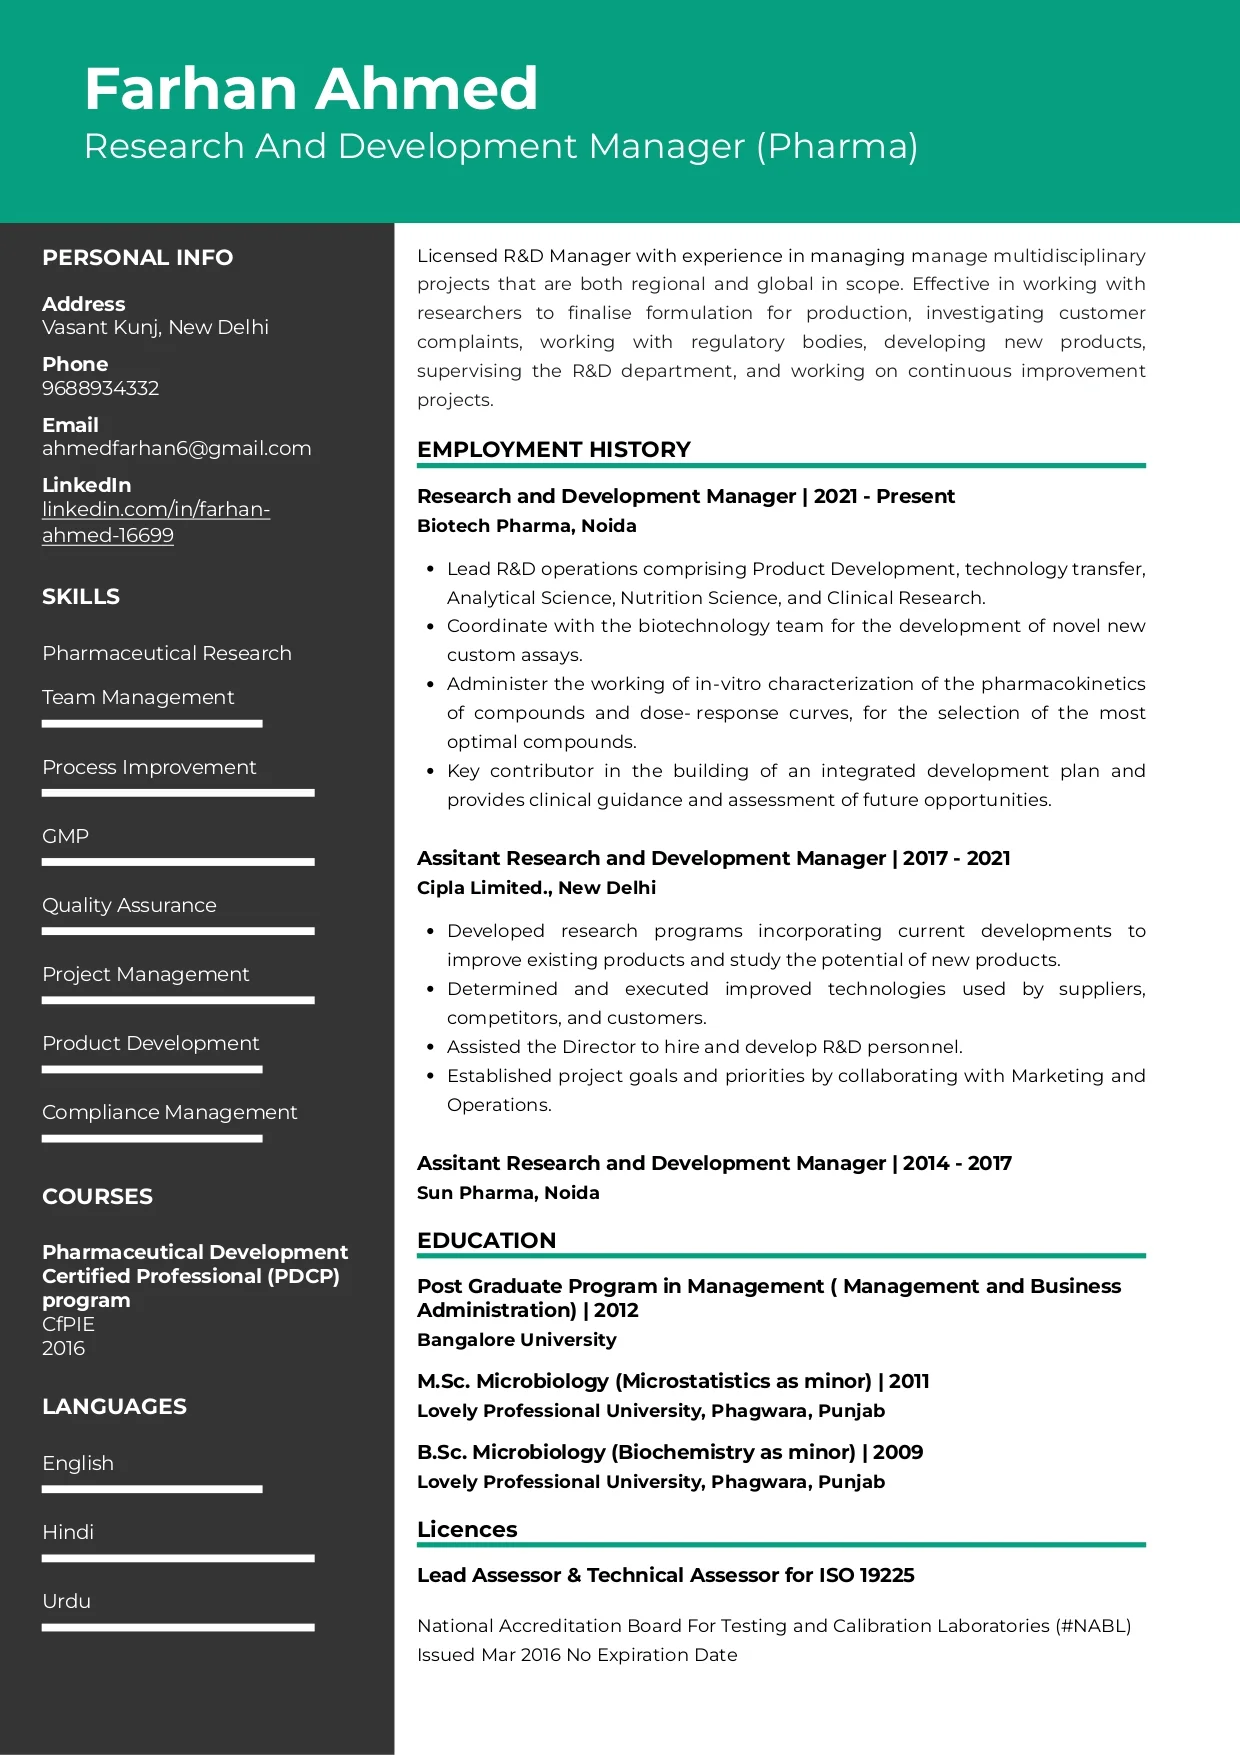 Sample Resume of Research & Development (R&D) Manager-Pharma | Free Resume Templates & Samples on Resumod.co